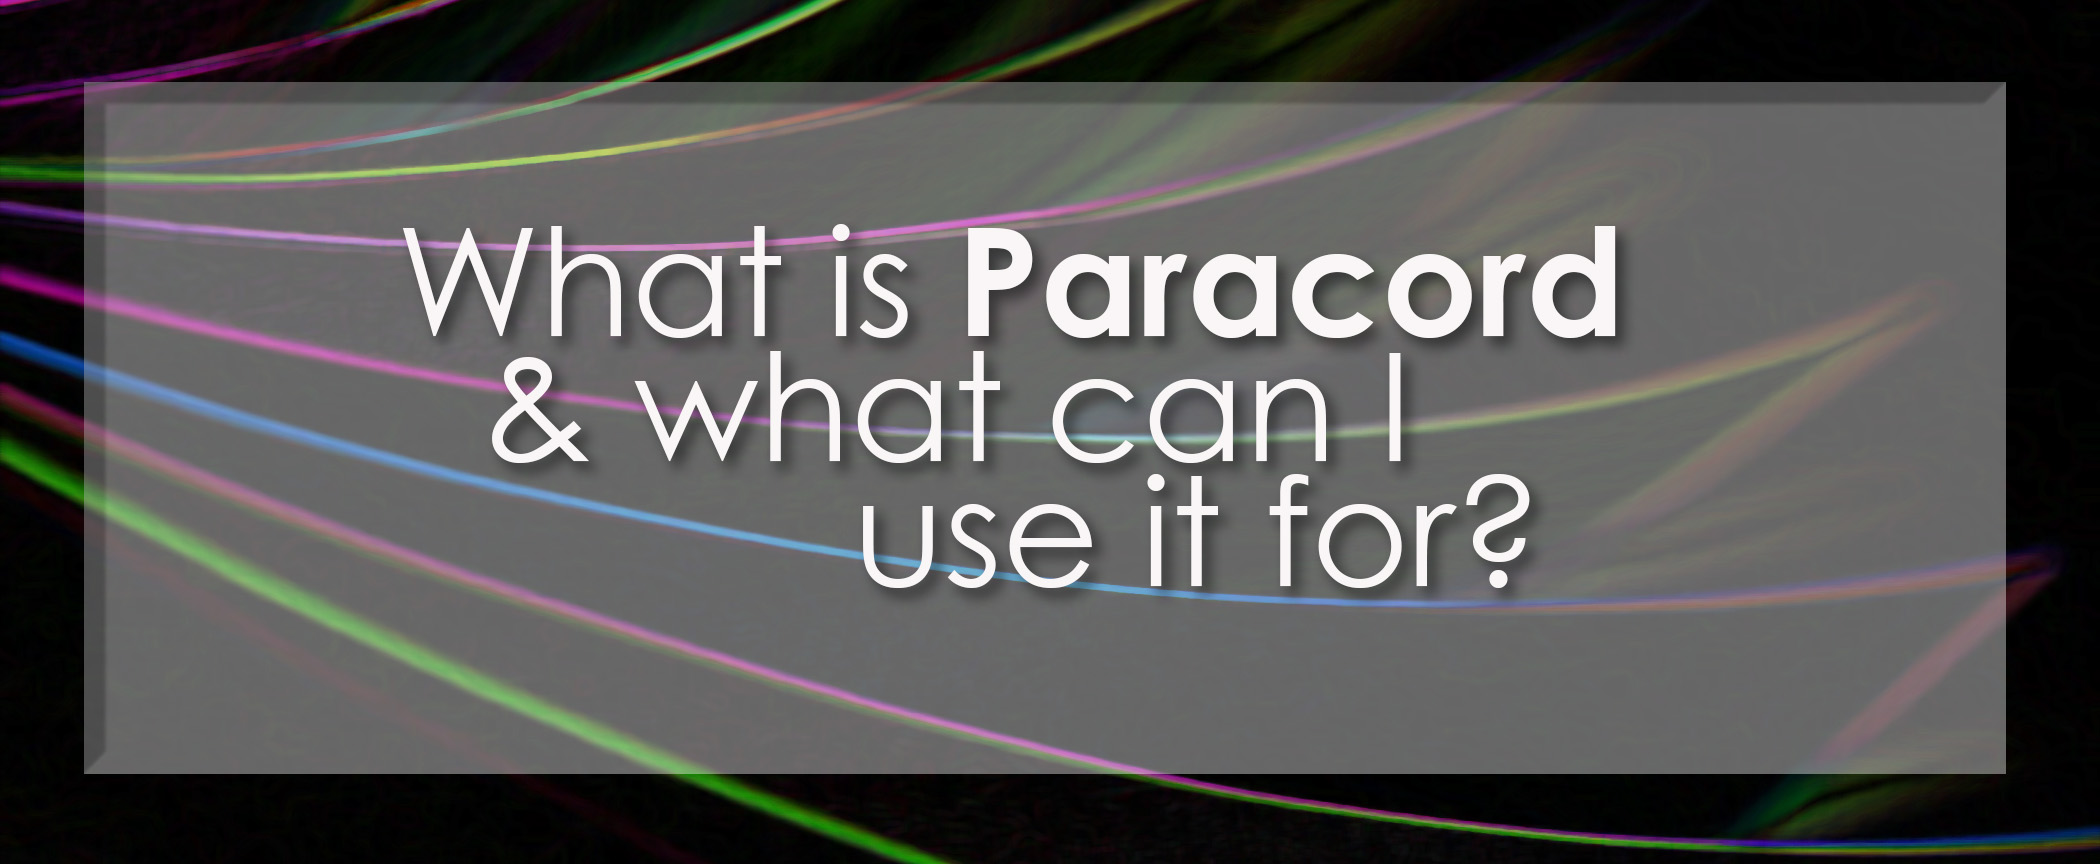 what is parachute cord